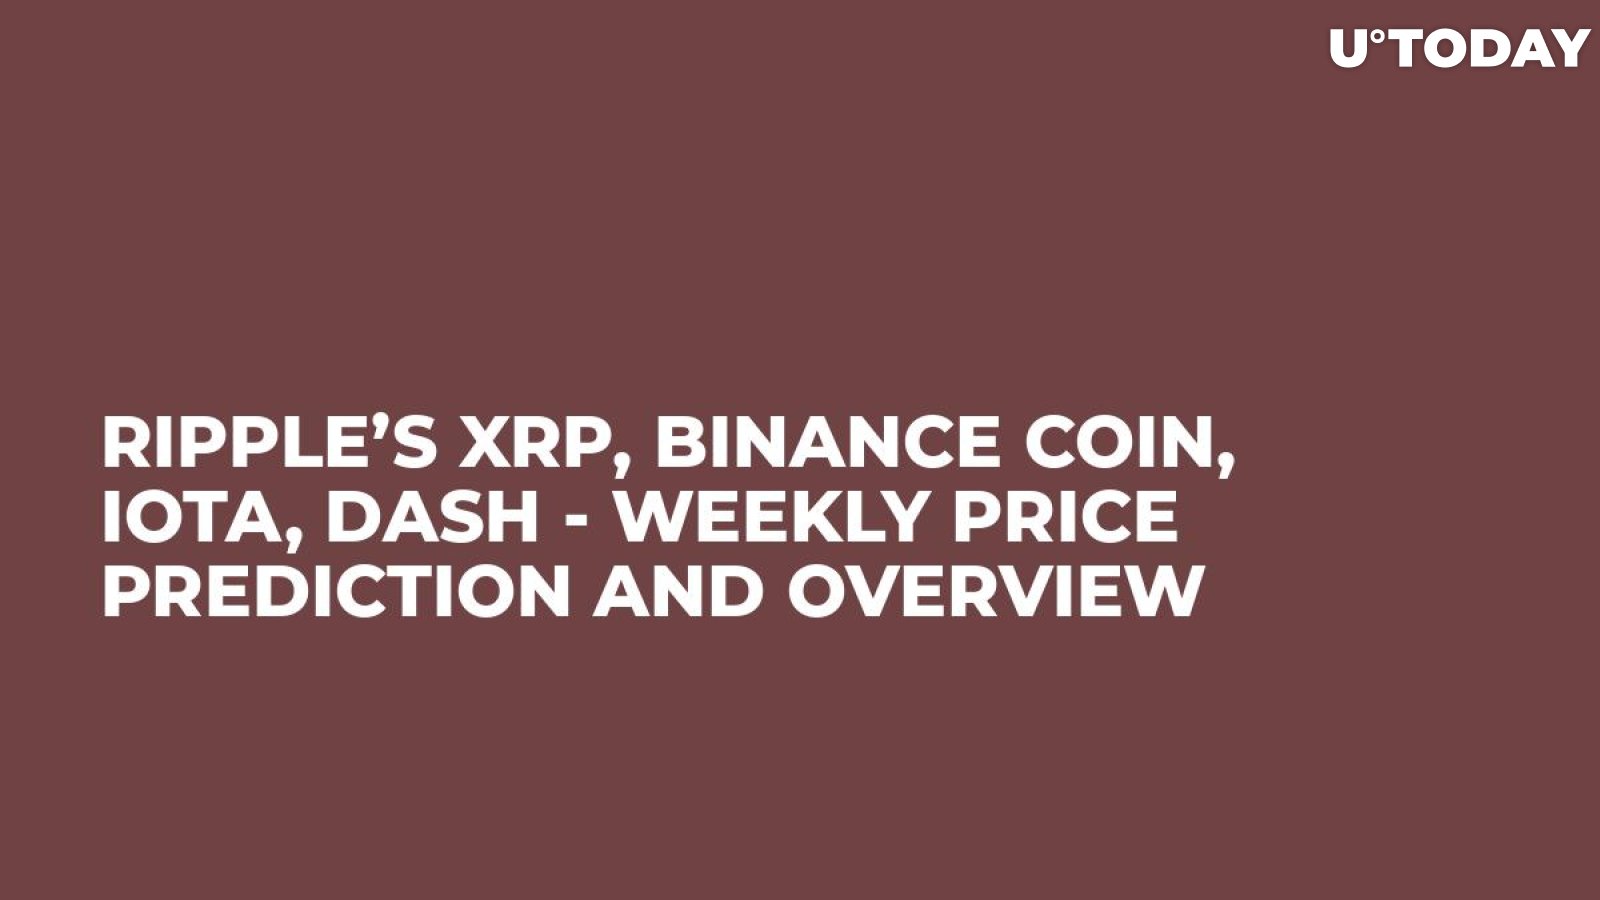 Ripple’s XRP, Binance Coin, IOTA, Dash - Weekly Price Prediction and Overview